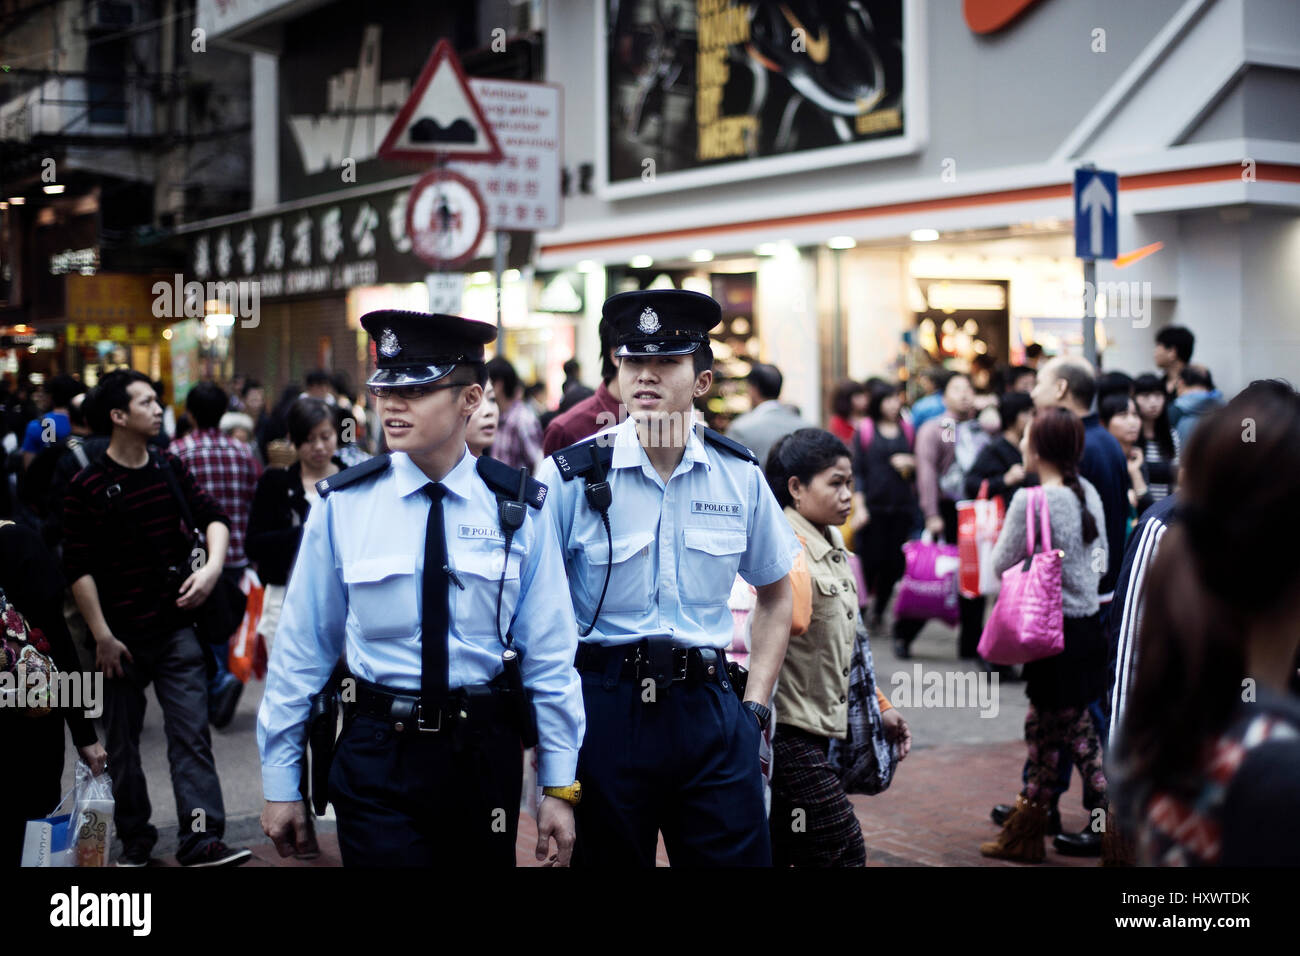 Two police men on duty on a street in Hong Kong, China. Stock Photo